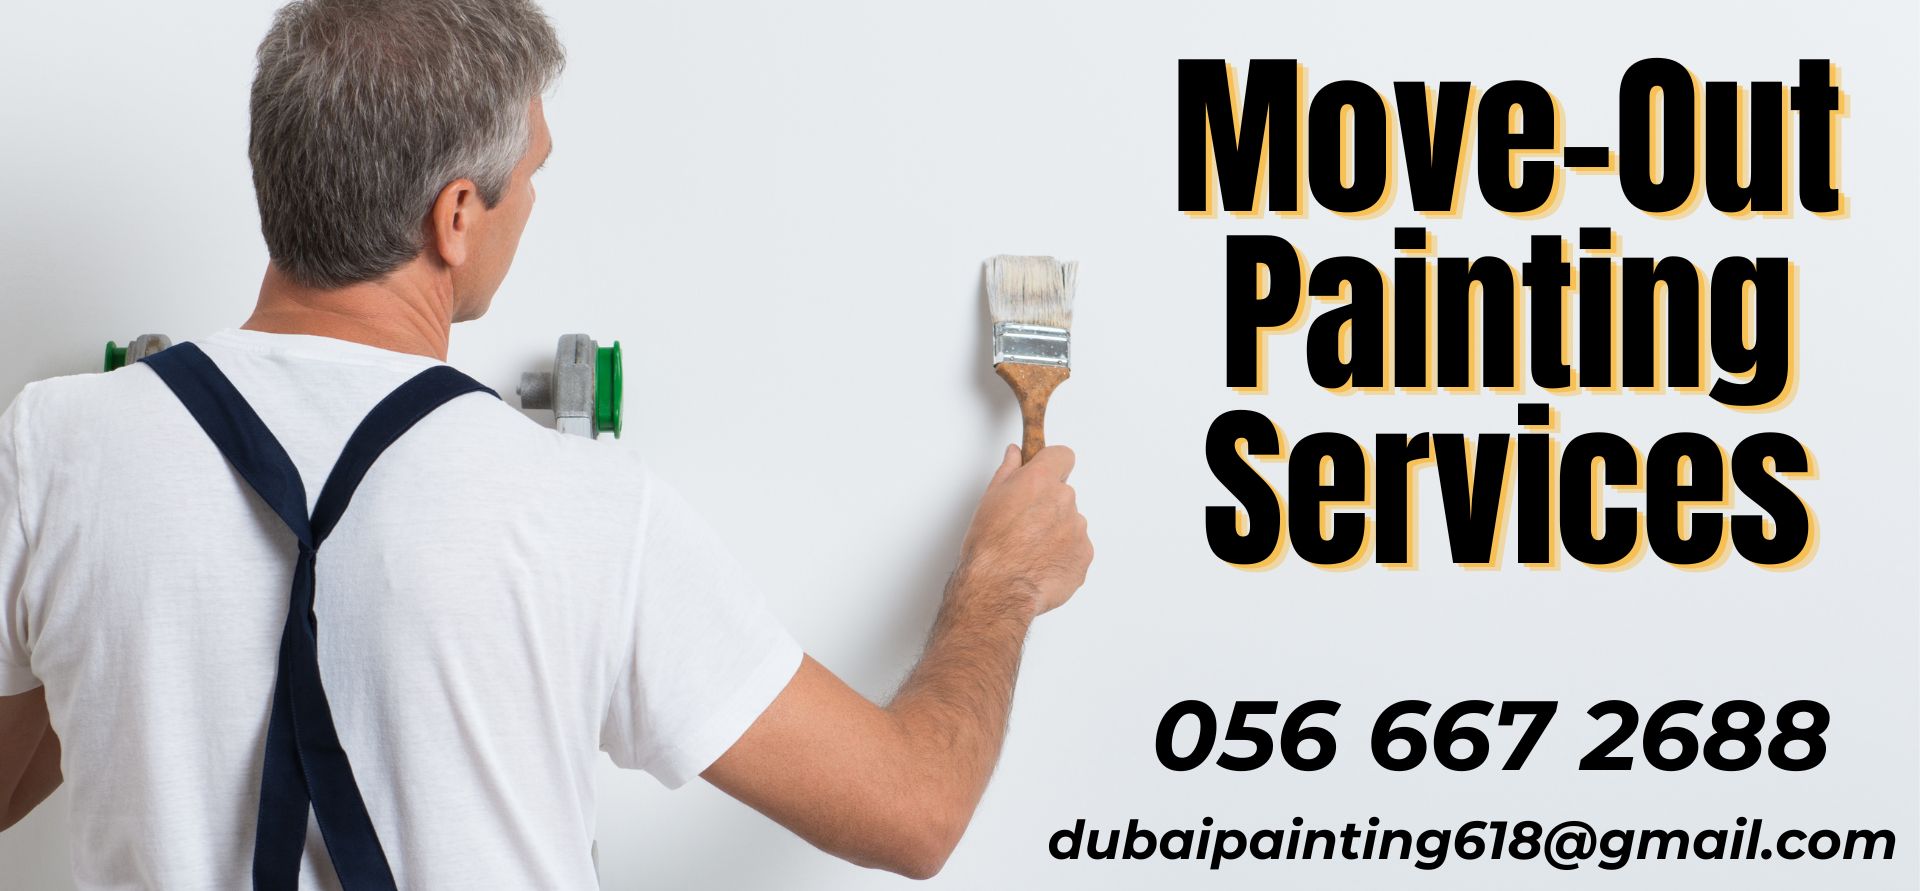 Move-Out Painting Services